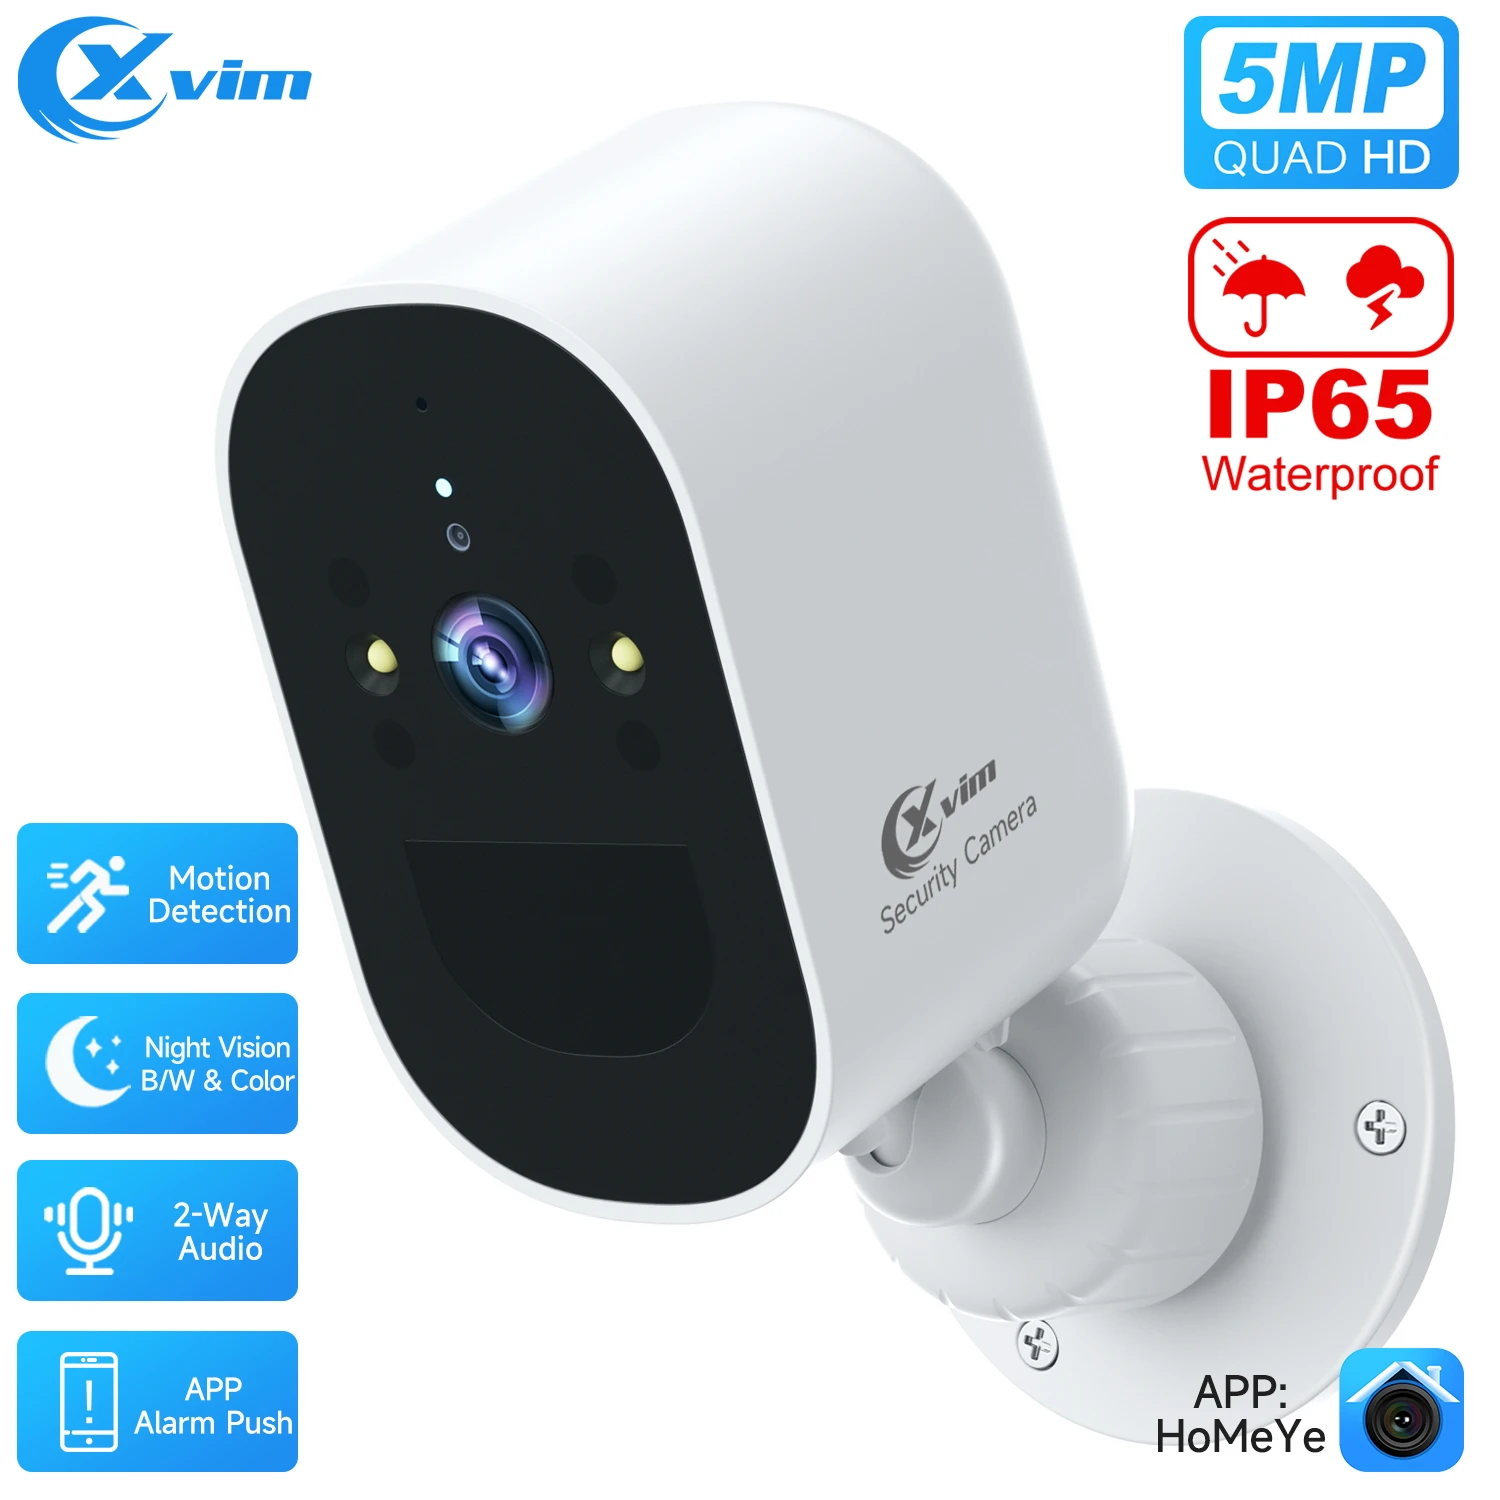 XVIM 5MP Security Protection Surveillance Camera 4MP Outdoor IR Night Vision Motion Detection Security Home Survalance Camera